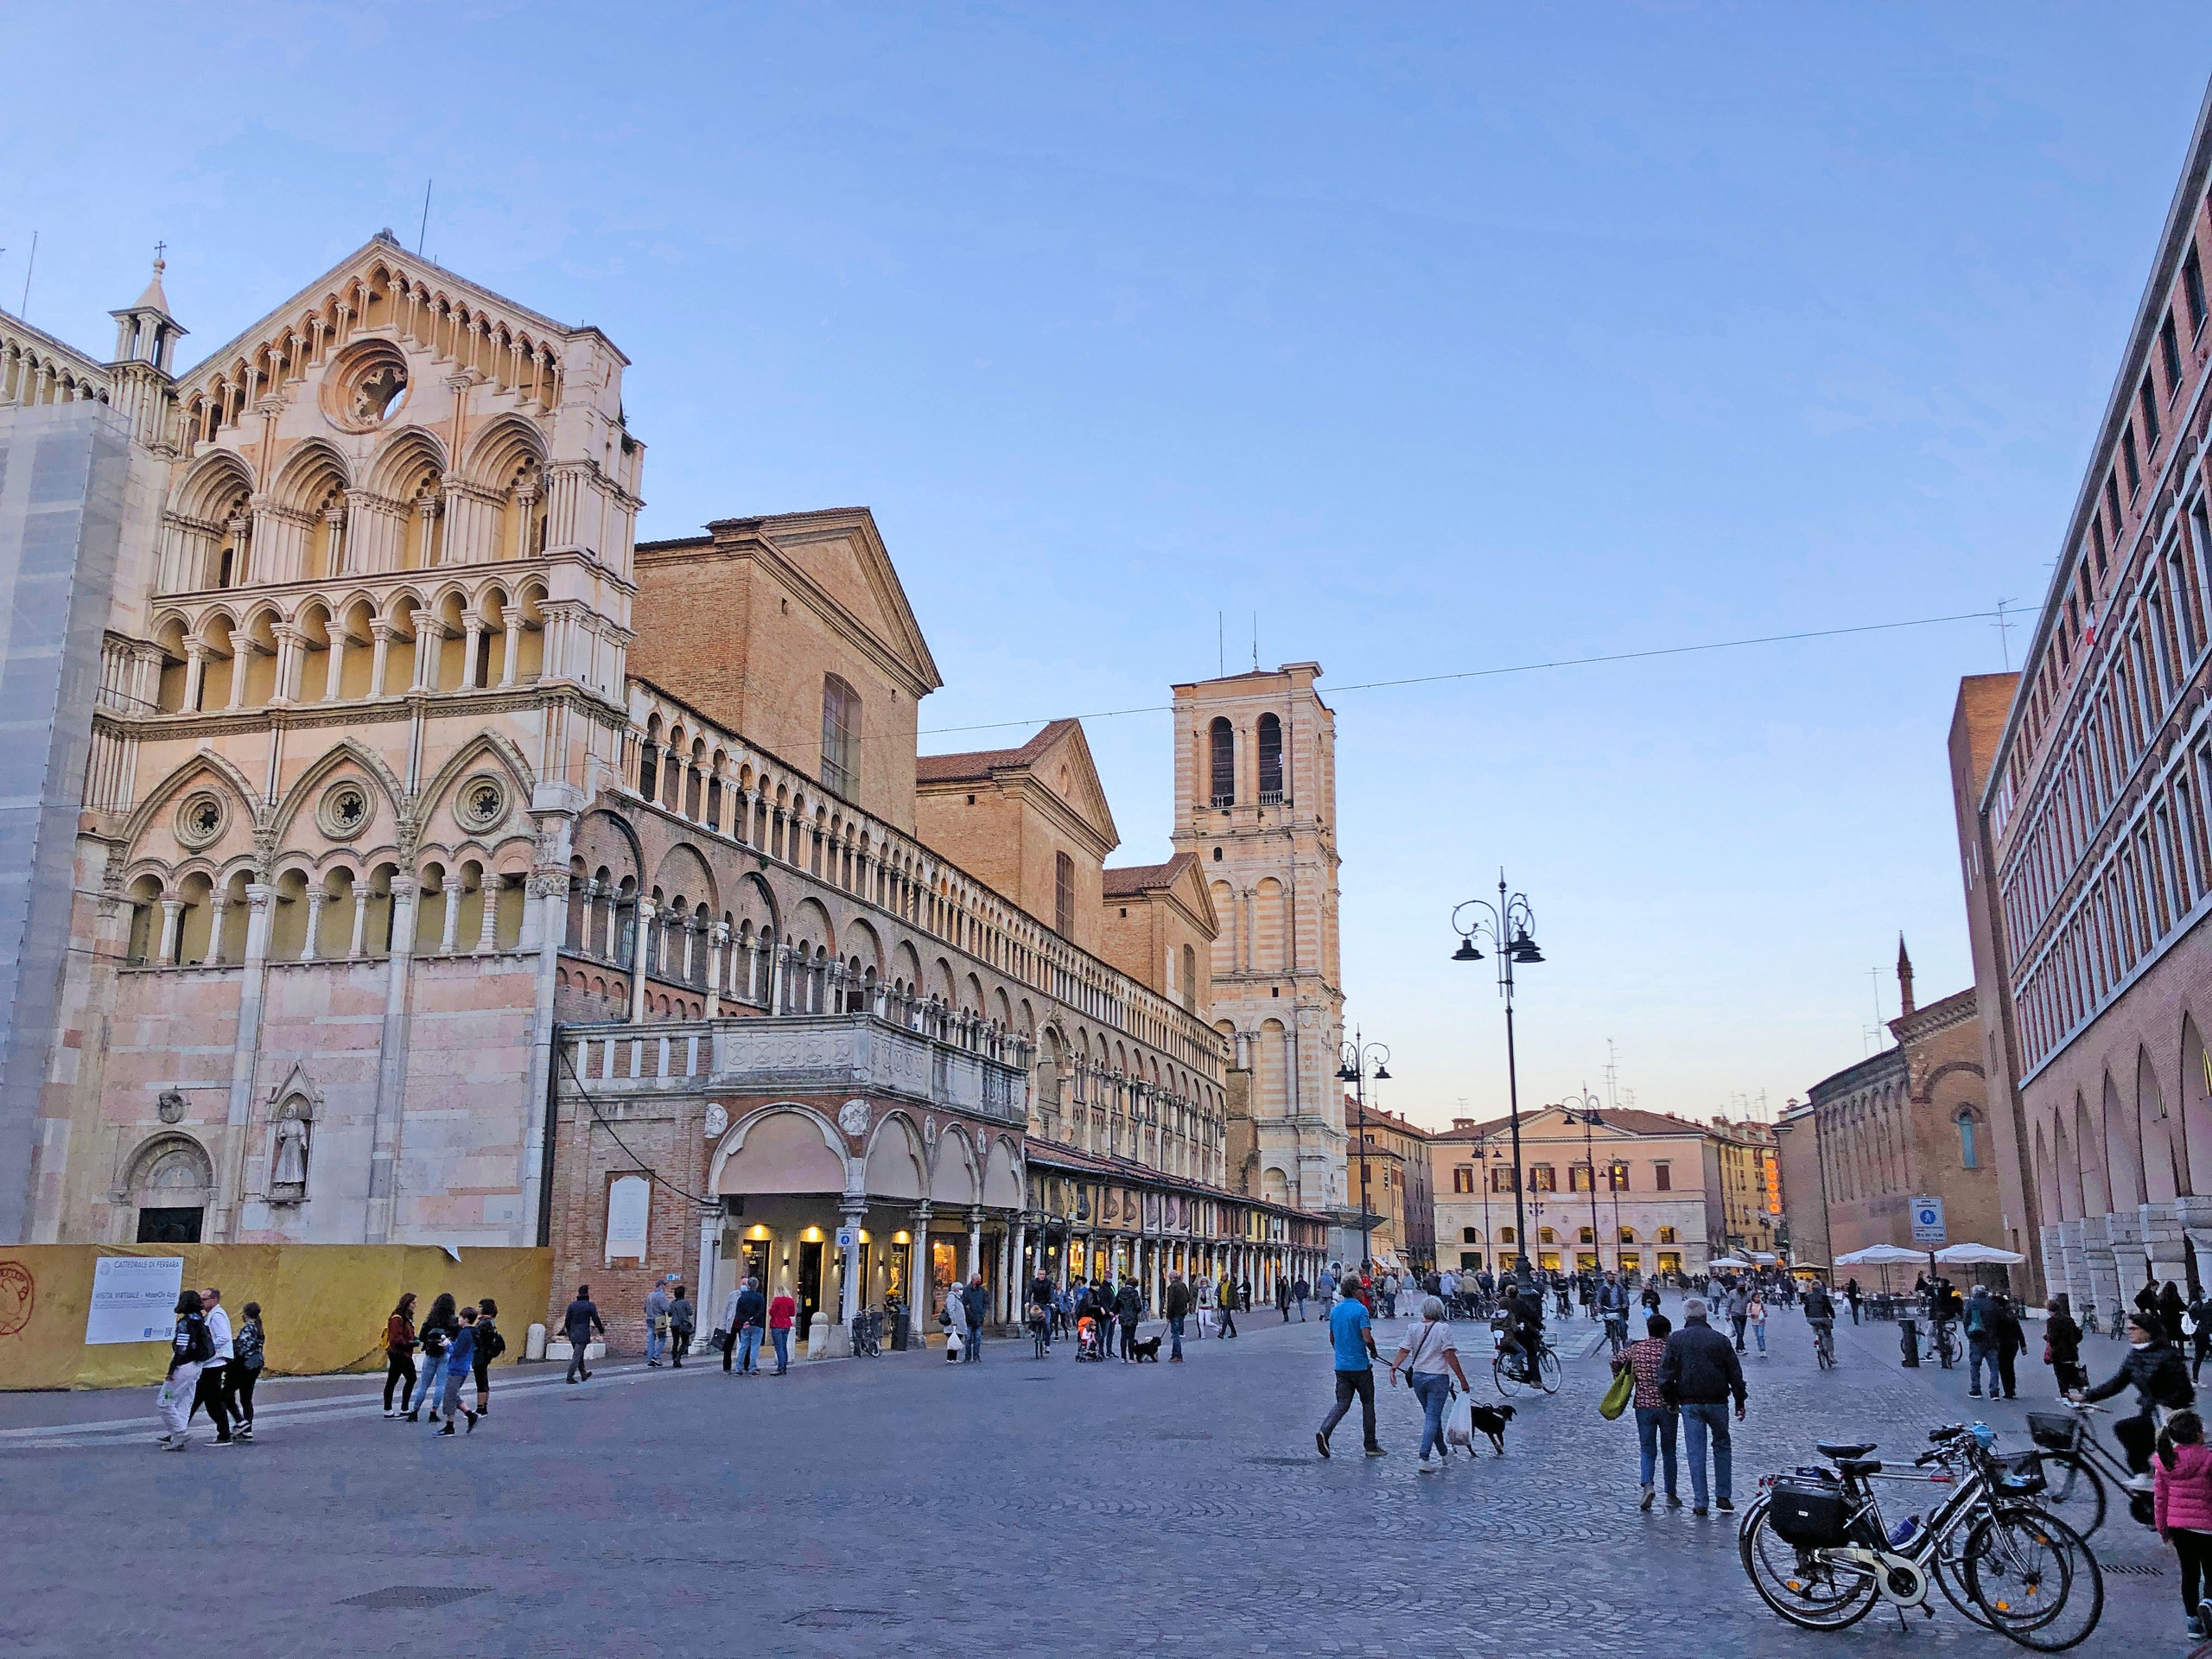 Visiting Florence is one of the highlights of Venice and Florence self-guided biking tour